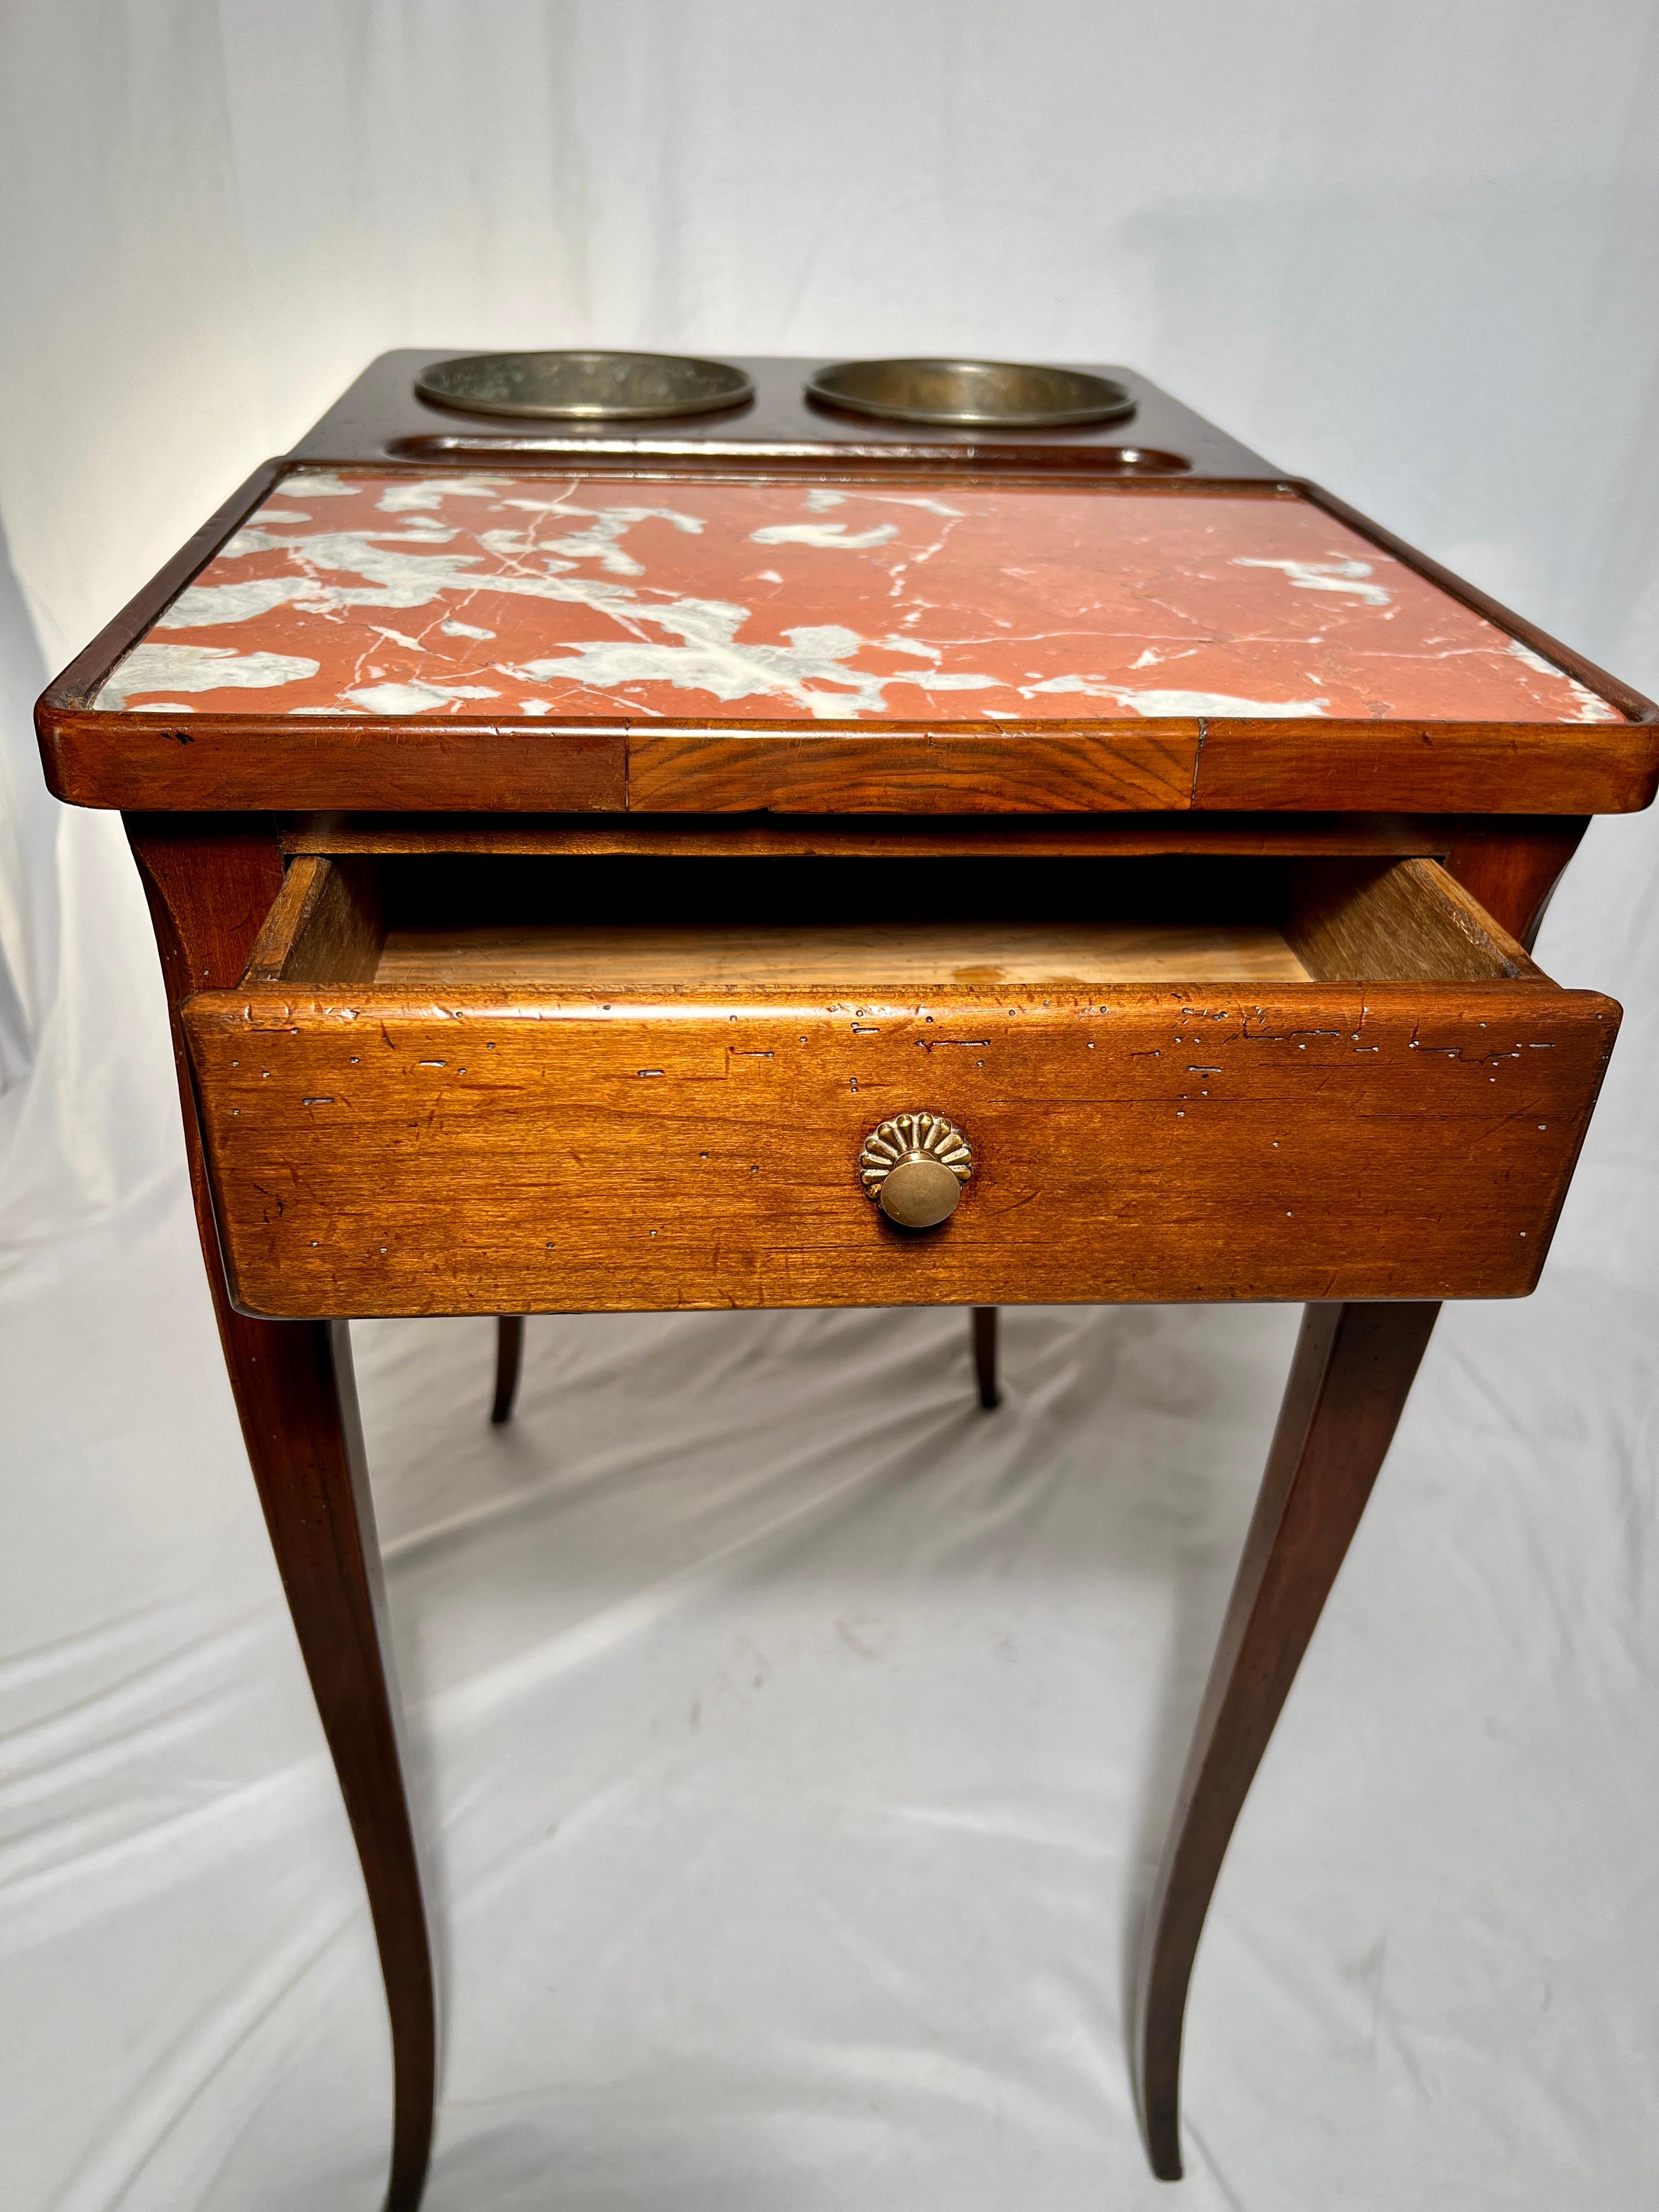 20th Century Antique French Walnut & Marble Rafraîchissoir Wine Table with Coolers Circa 1900